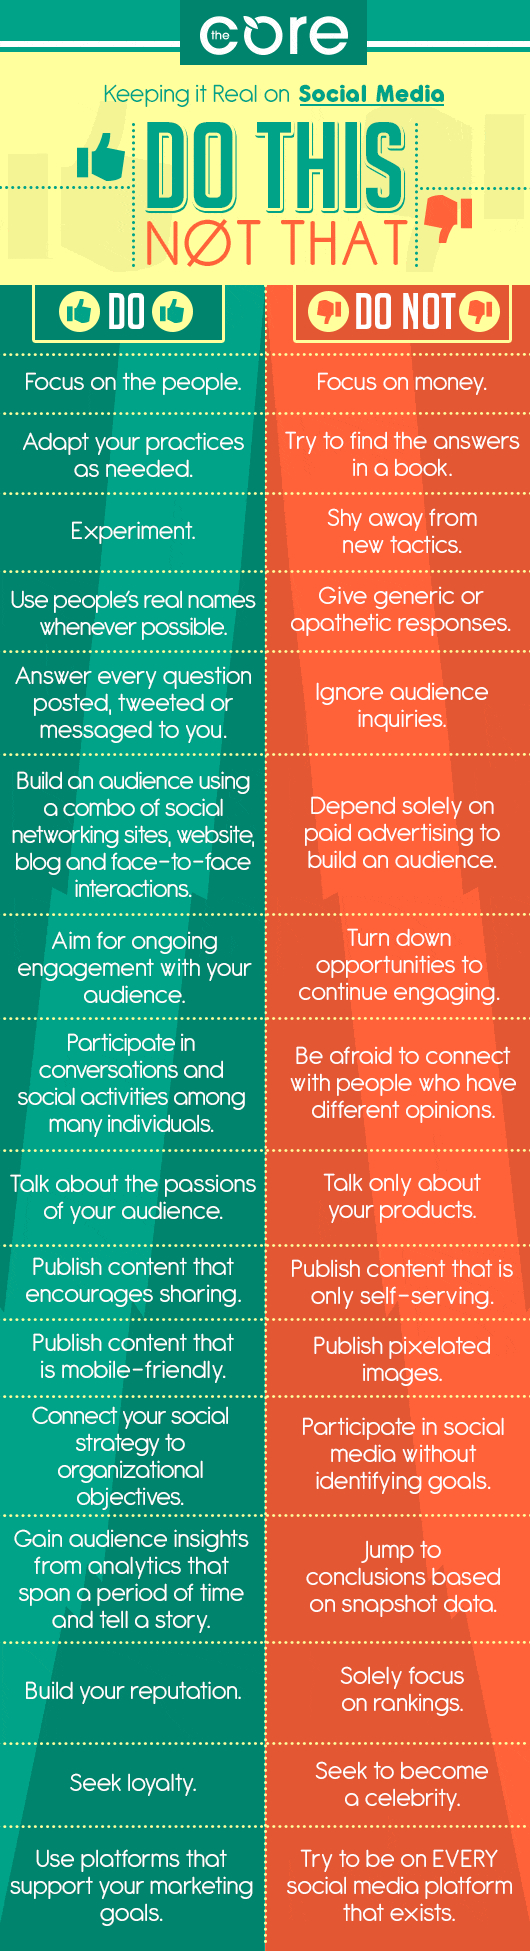 social media dos and donts